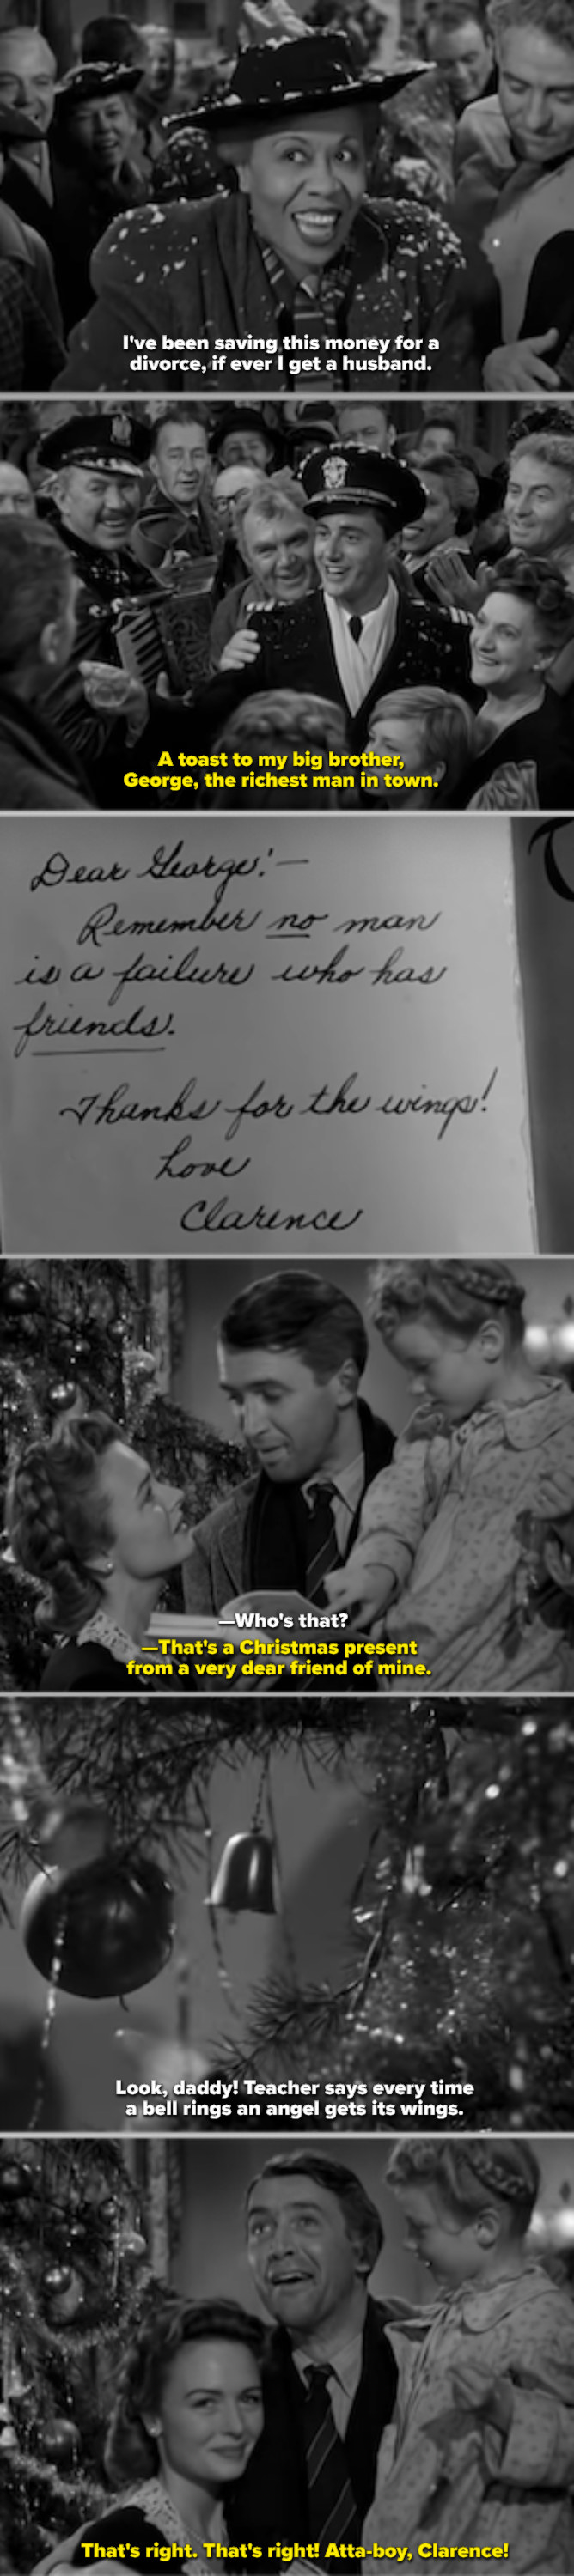 The entire town handing money to George Bailey at his home, then everyone singing together